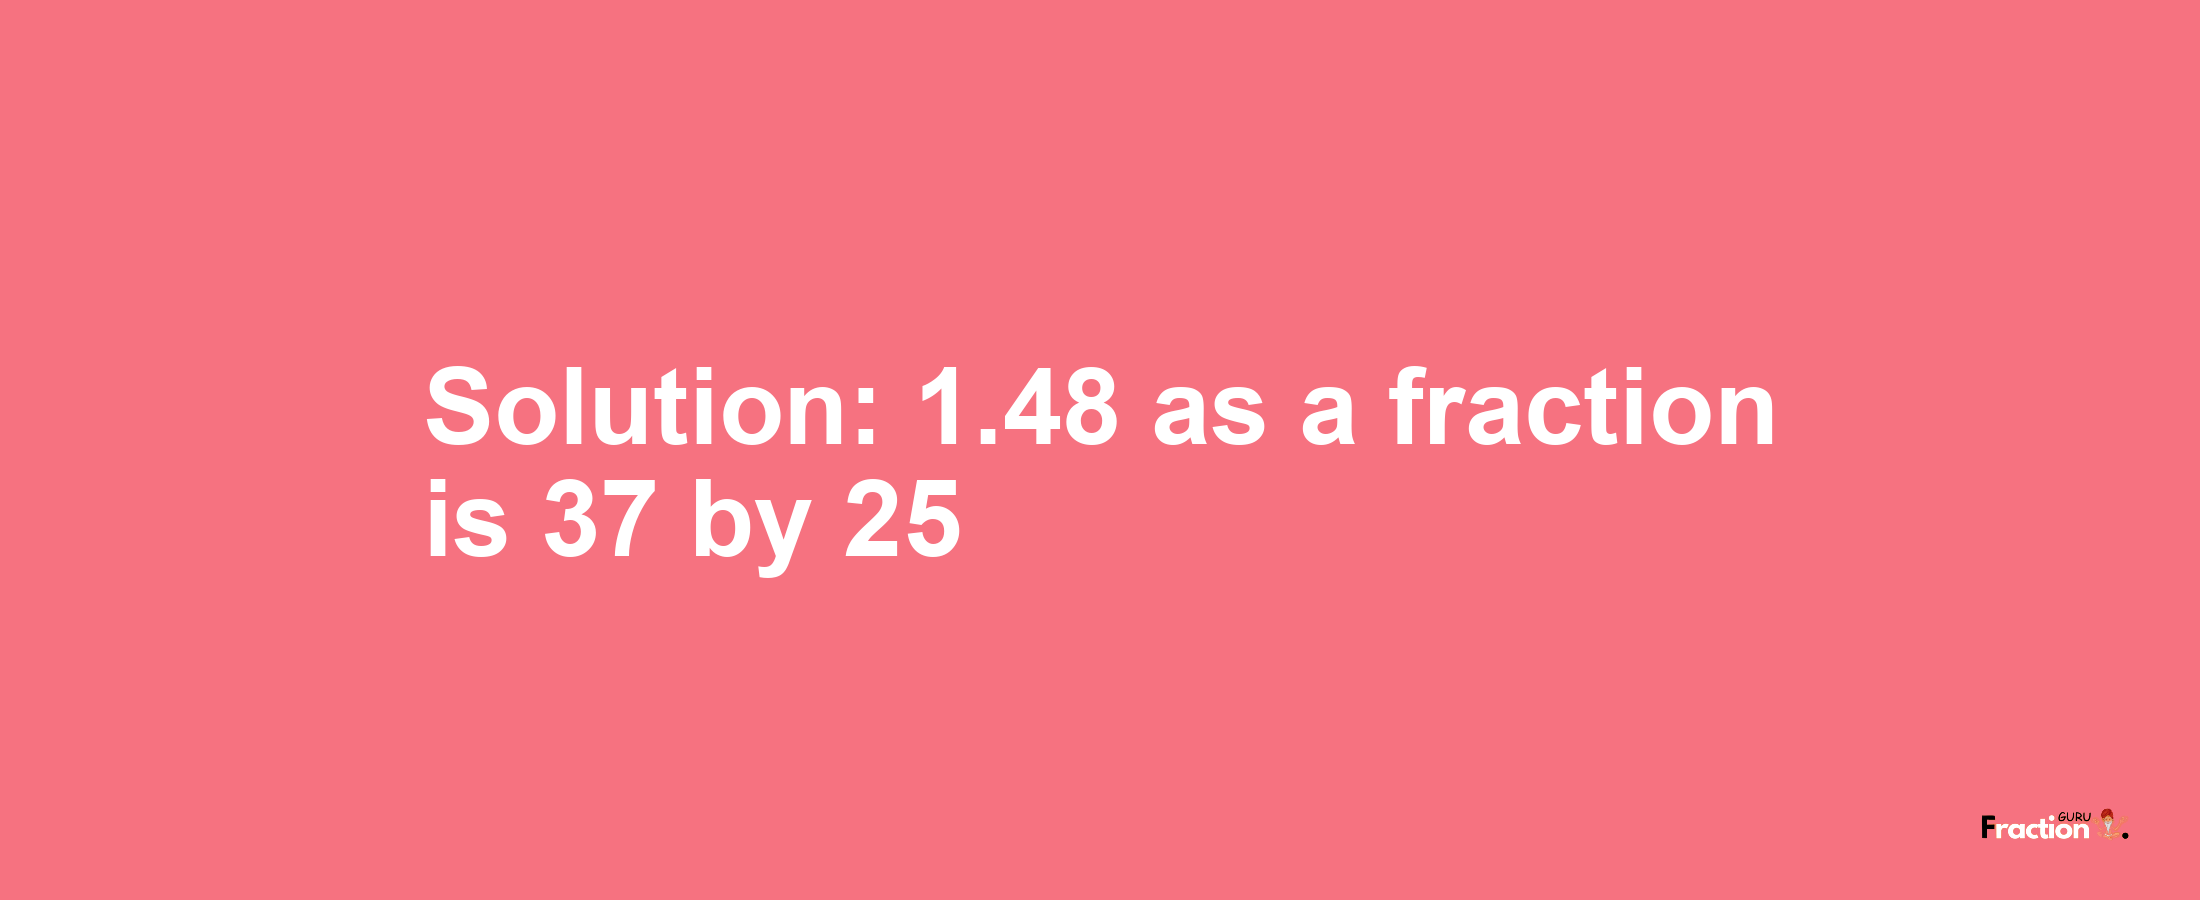 Solution:1.48 as a fraction is 37/25